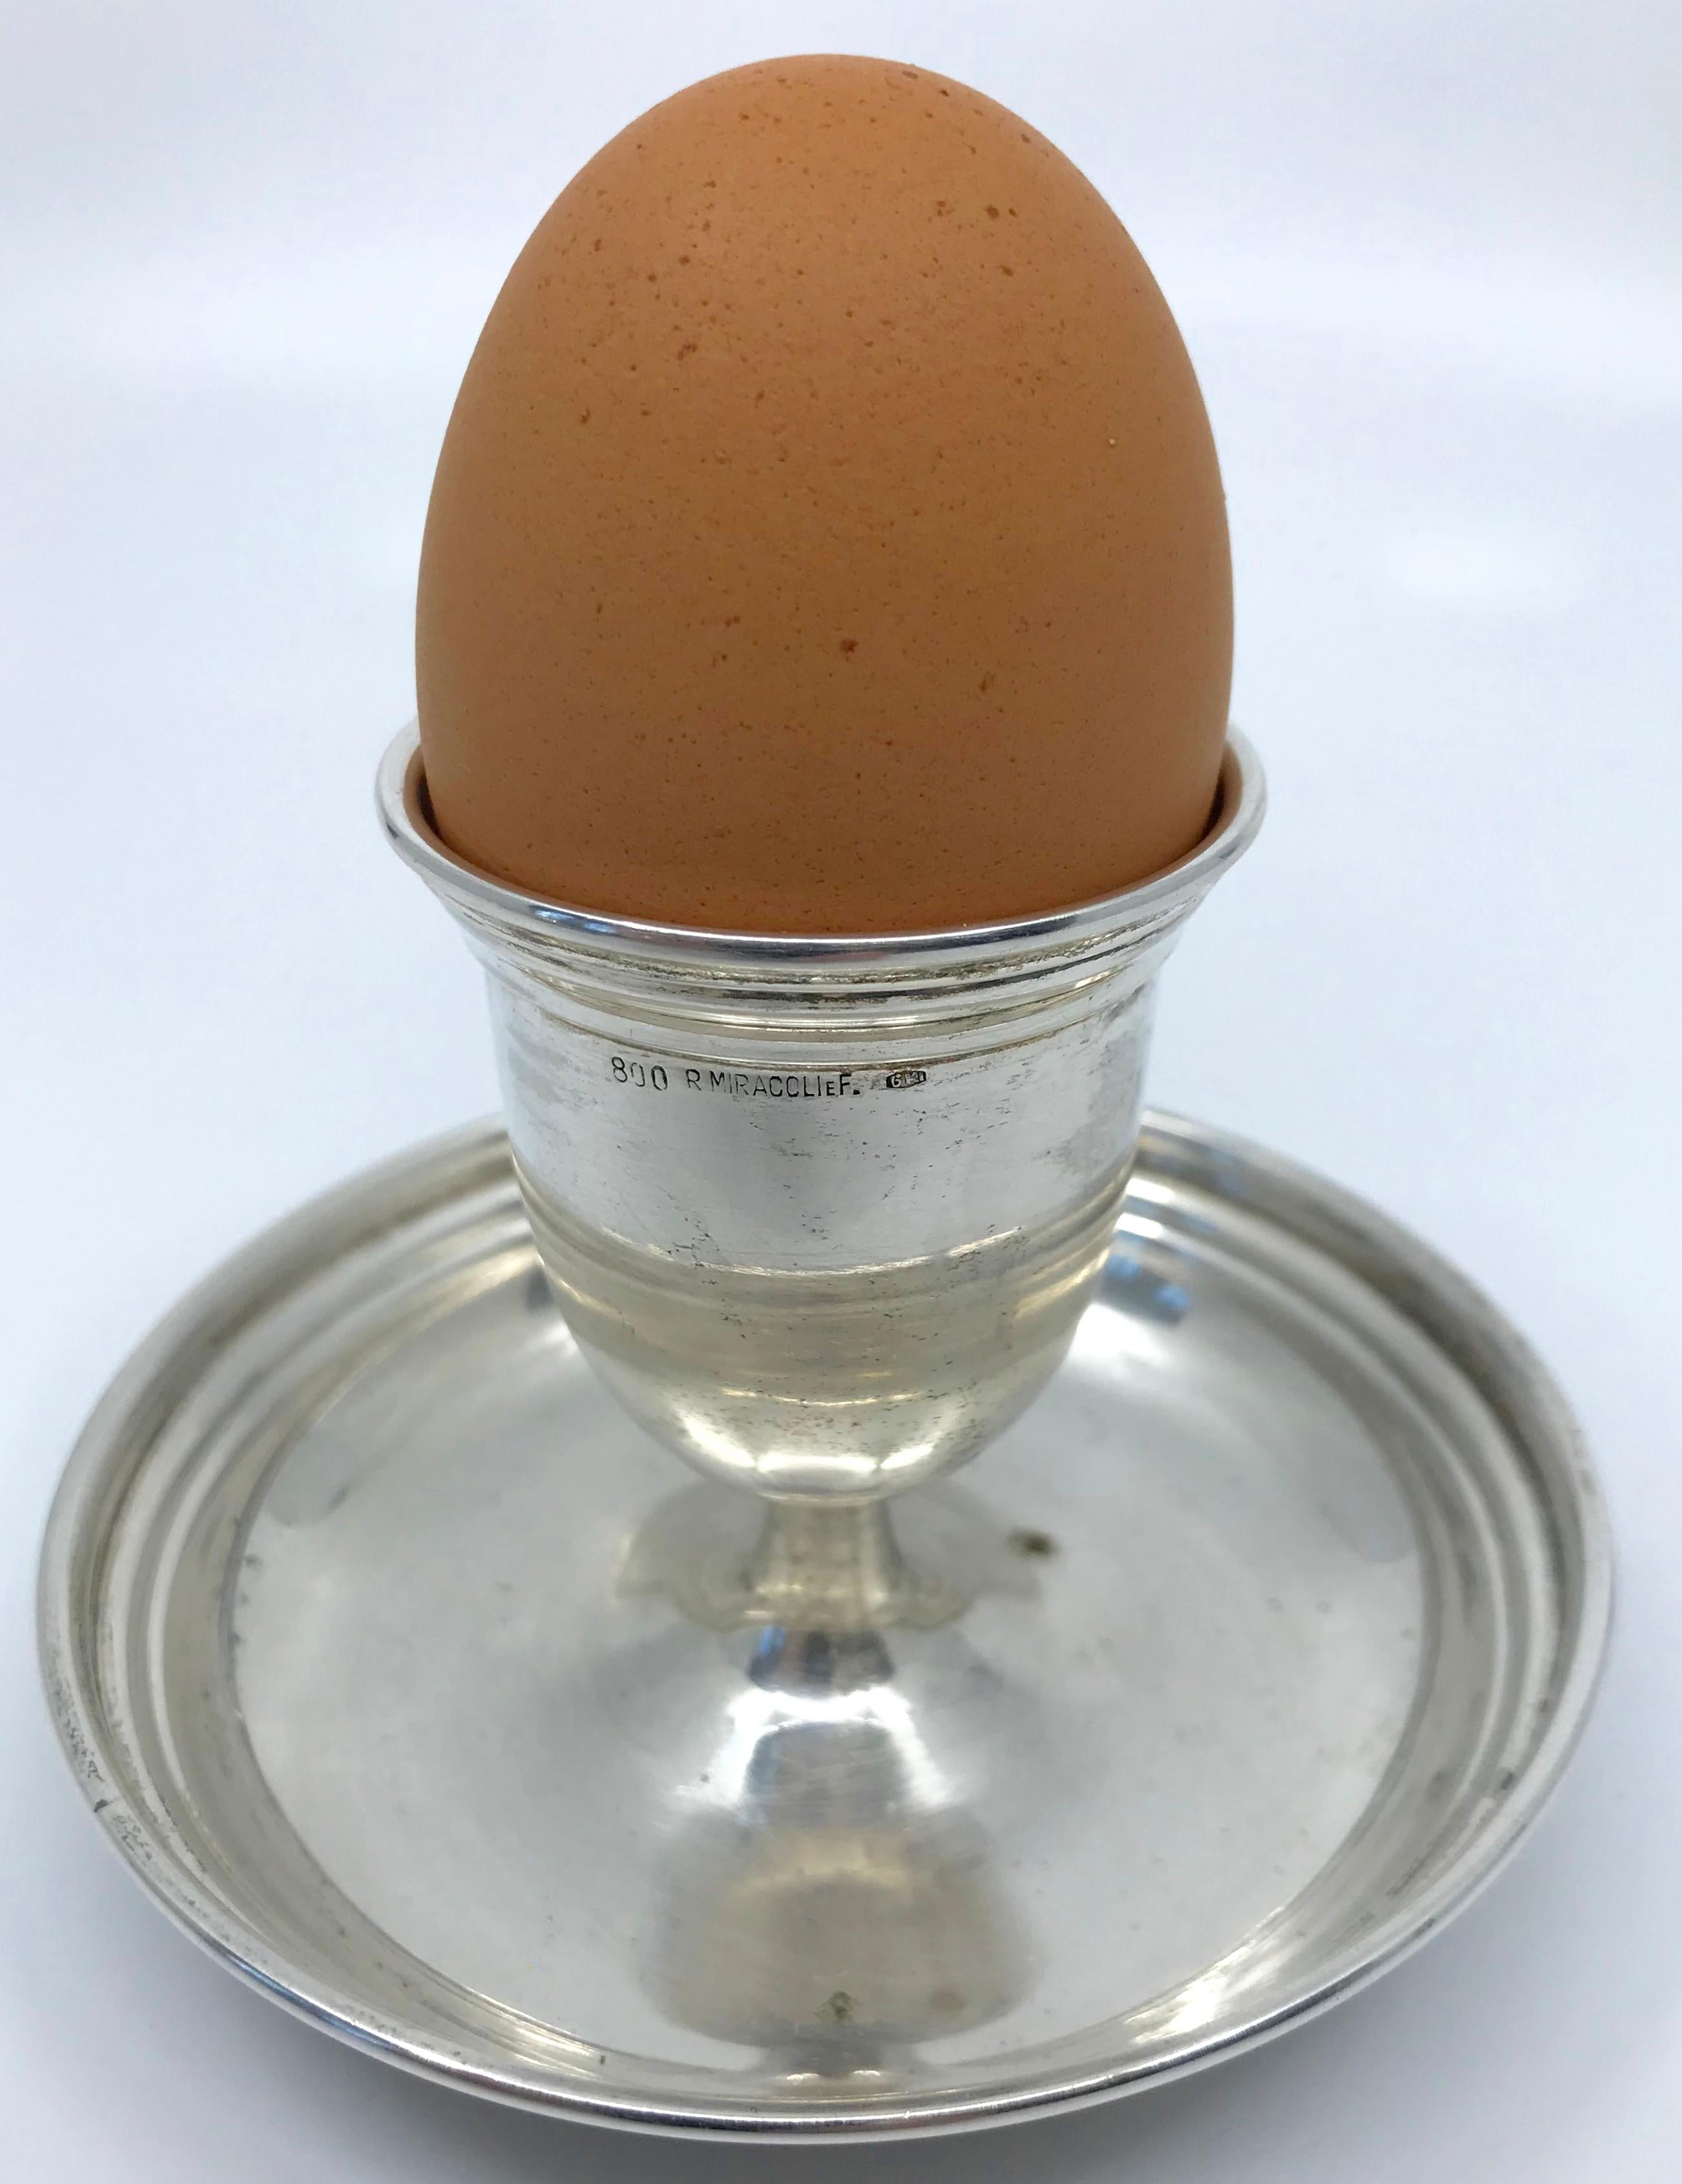 Sterling silver egg cup. Italian silver egg cup with markings for Romeo Miracoli e Filgio, stamped 